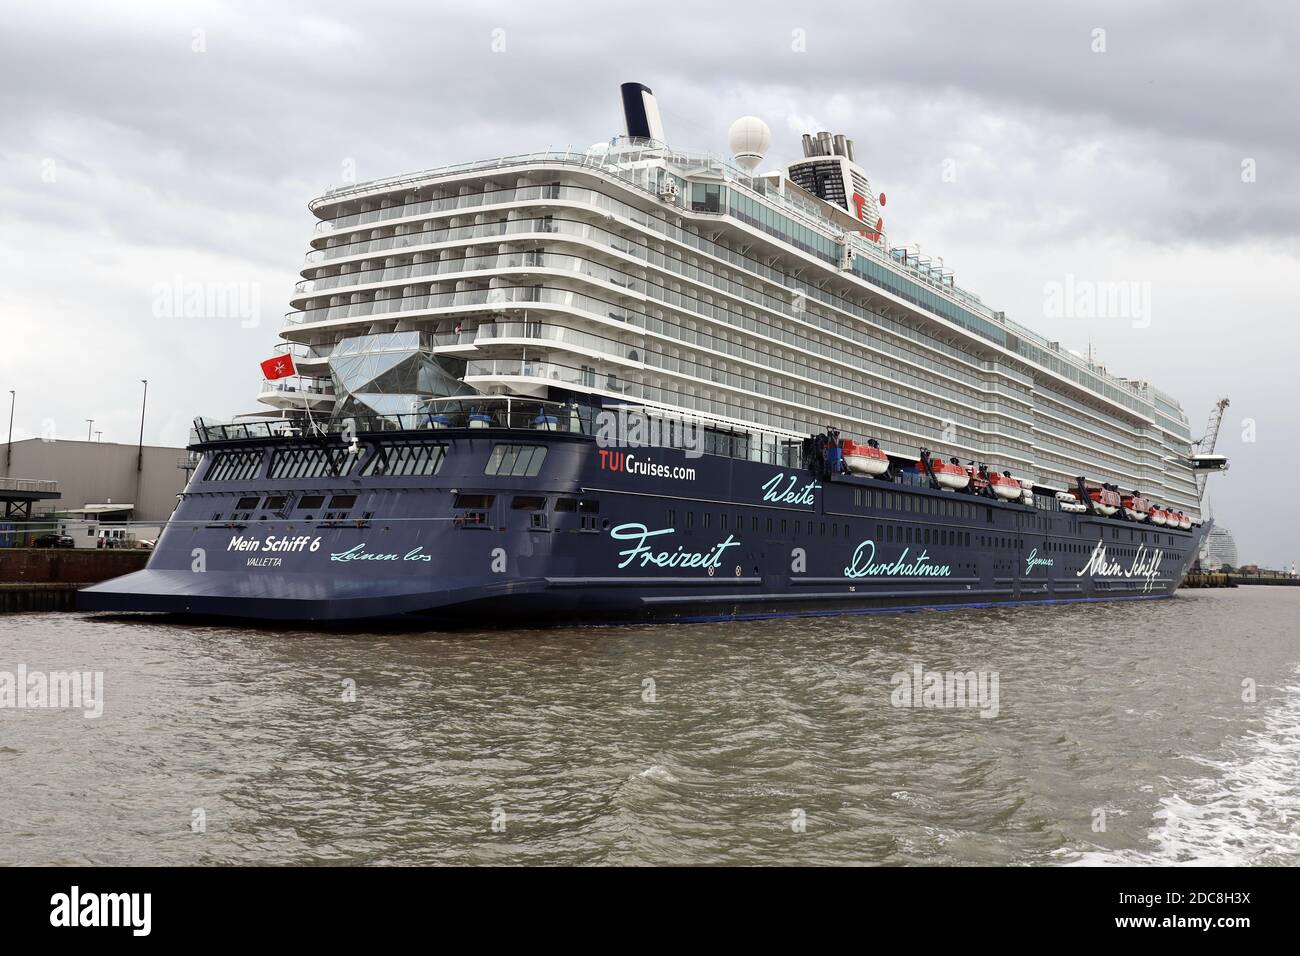 The cruise ship Mein Schiff 6 will be in Bremerhaven on August 24, 2020 at Columbuskaje Stock Photo